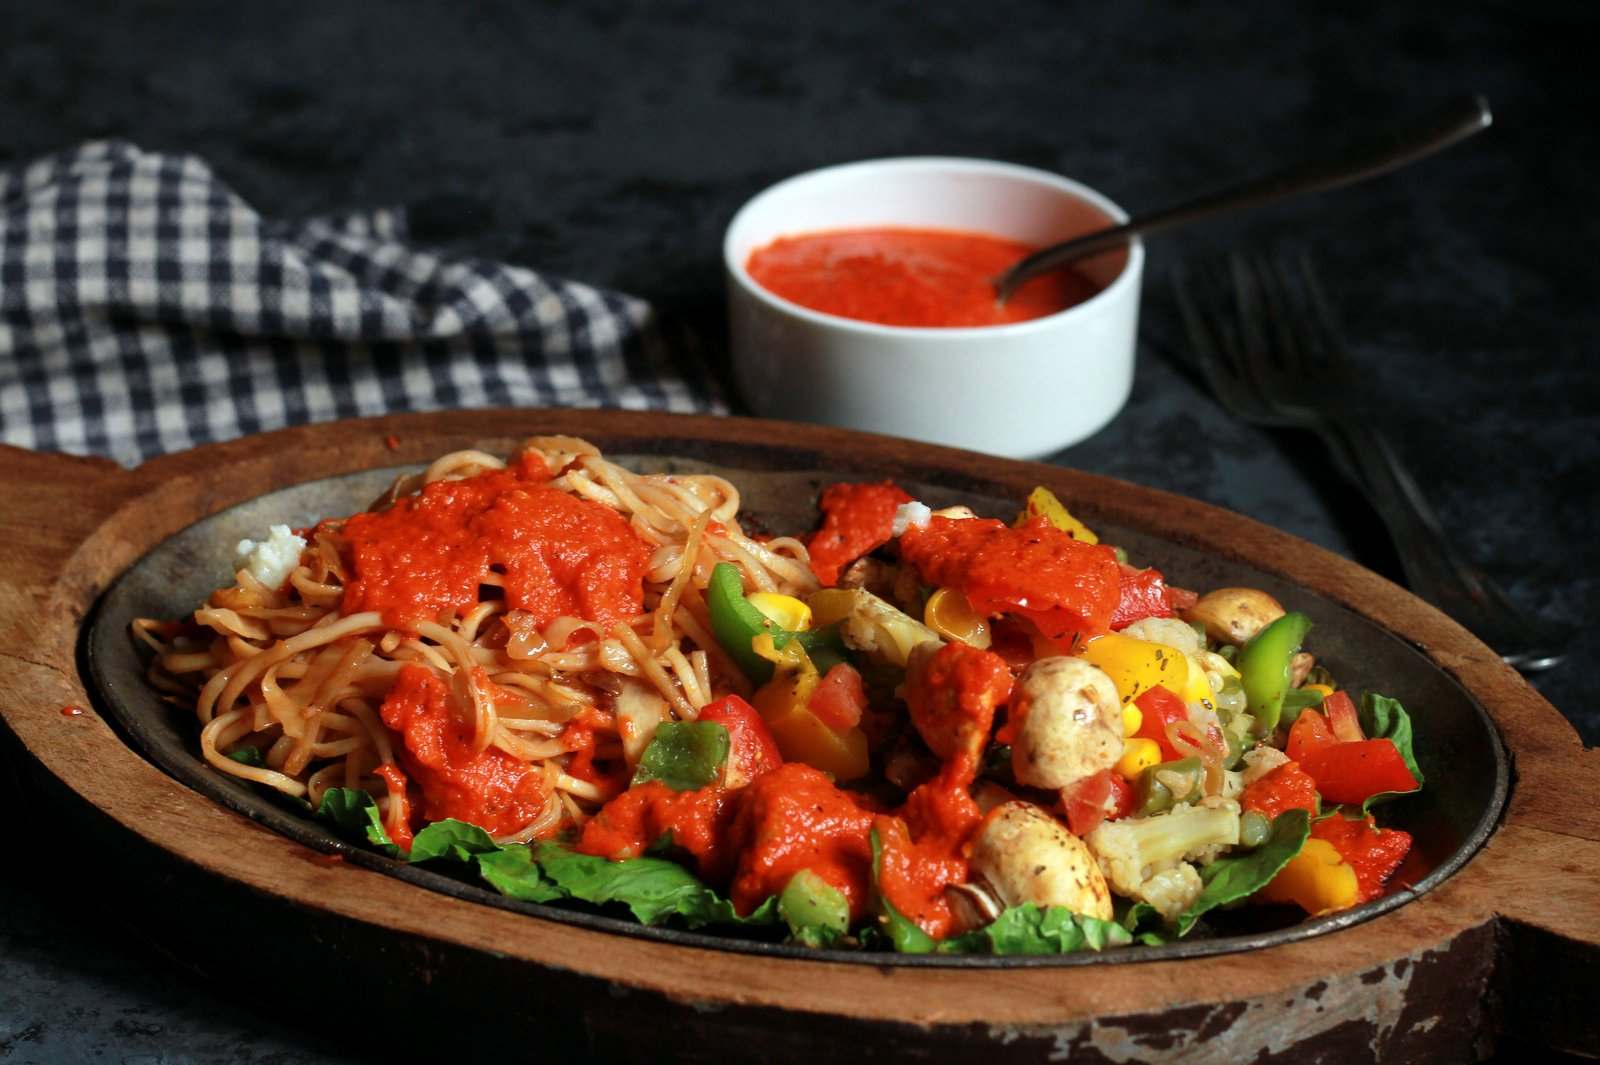 Noodle Sizzler With Garlic Pepper Sauce And Baked Vegetables Recipe